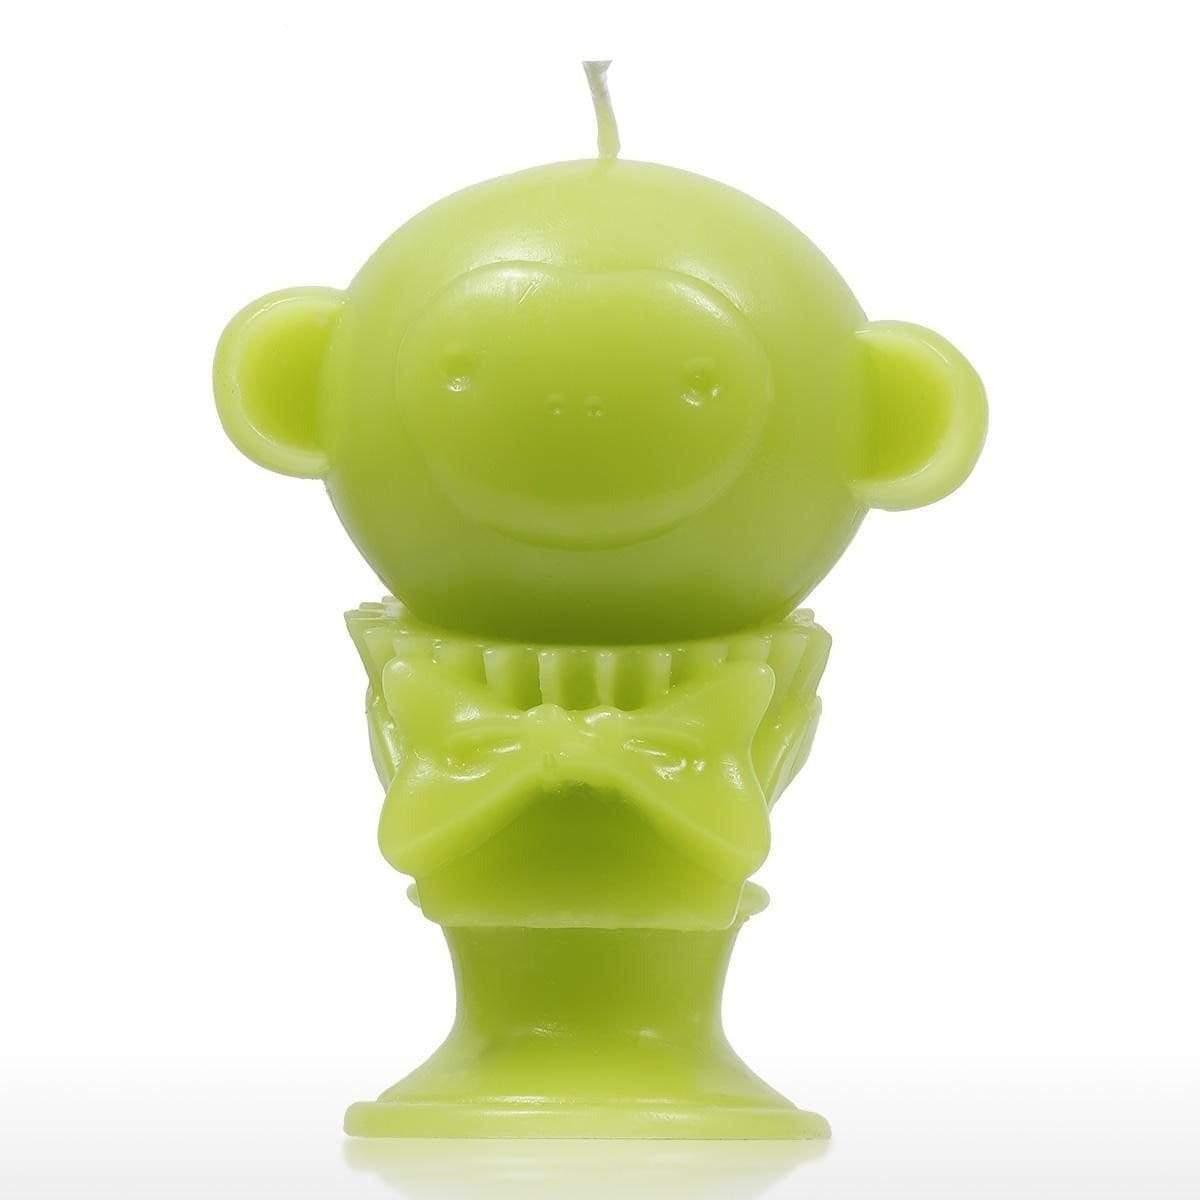 Quirky Monkey Skeleton Scented Wax Candle: A Playful Decorative Accent